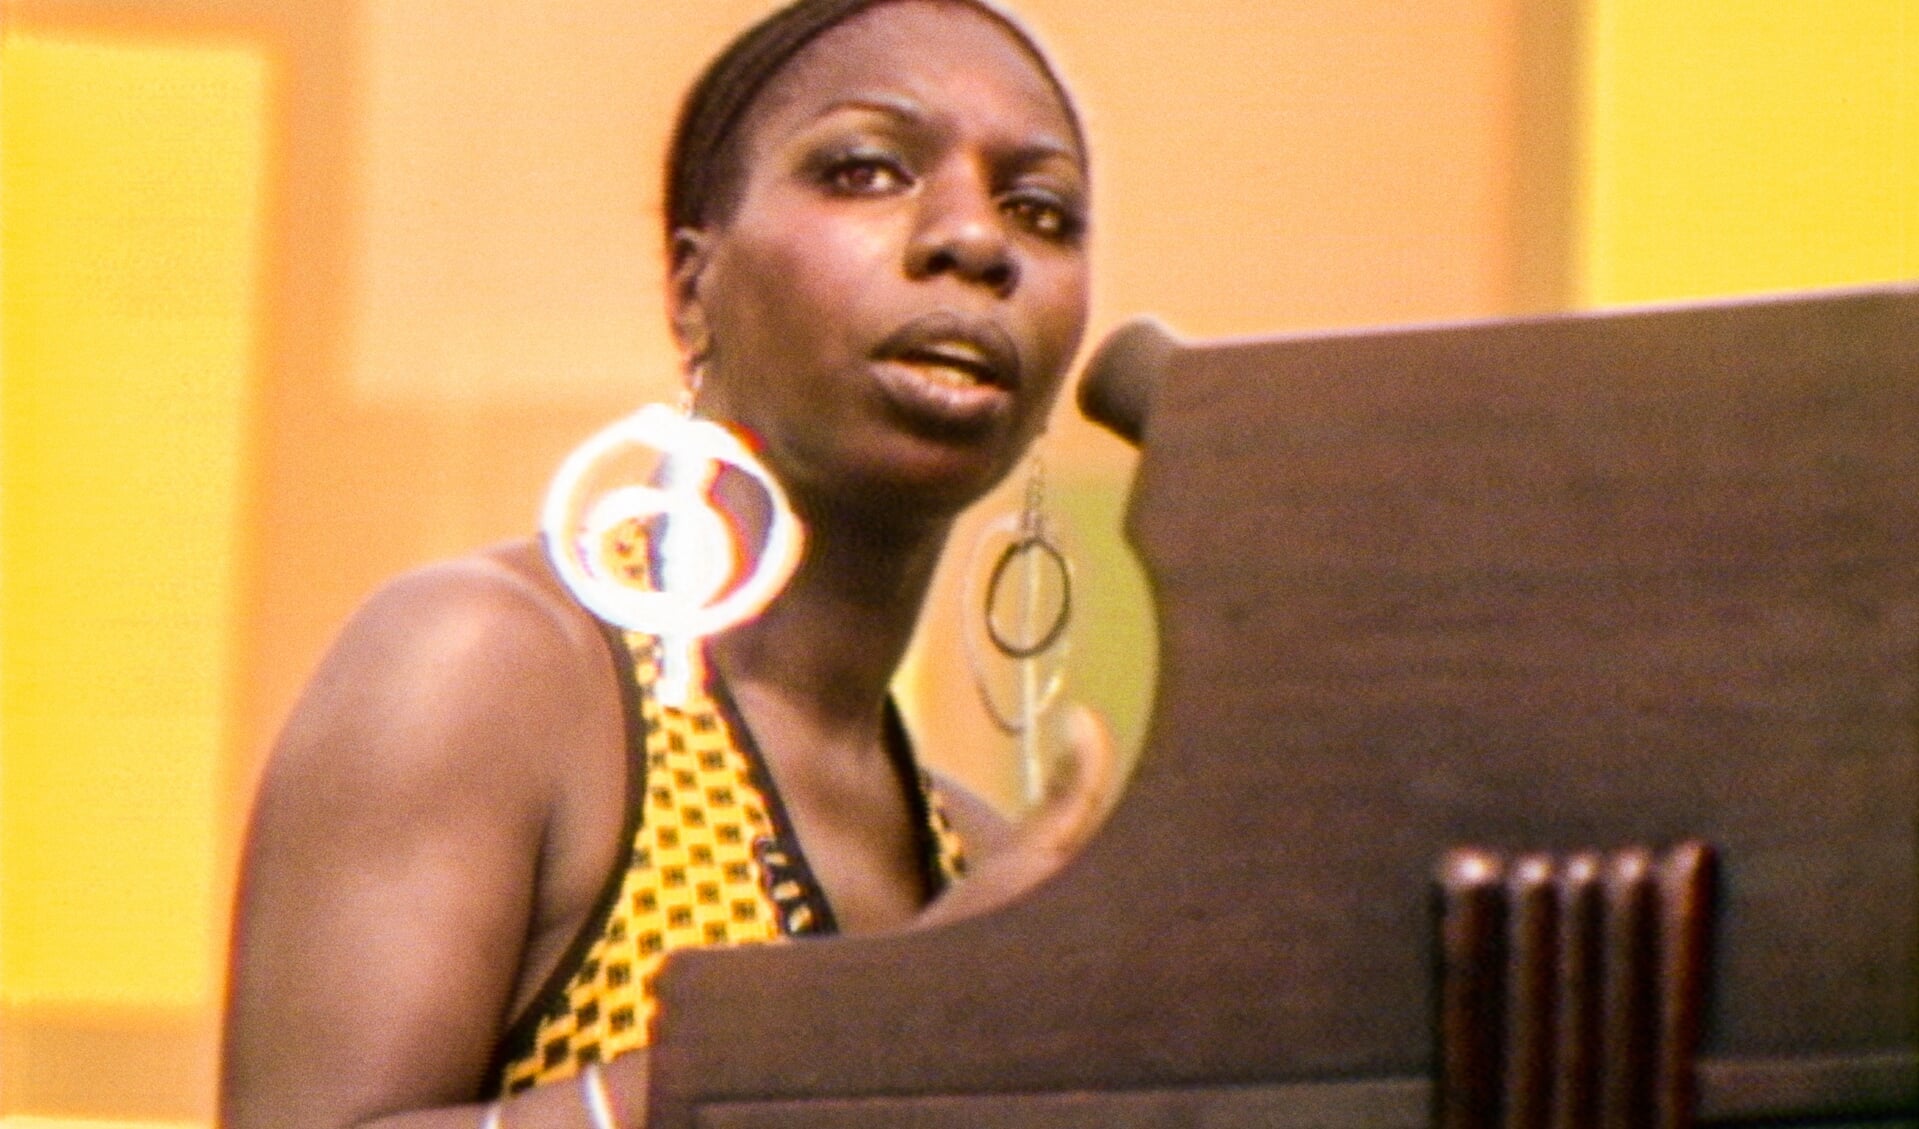 Nina Simone in SUMMER OF SOUL. Photo Courtesy of Searchlight Pictures. © 2021 20th Century Studios All Rights Reserved